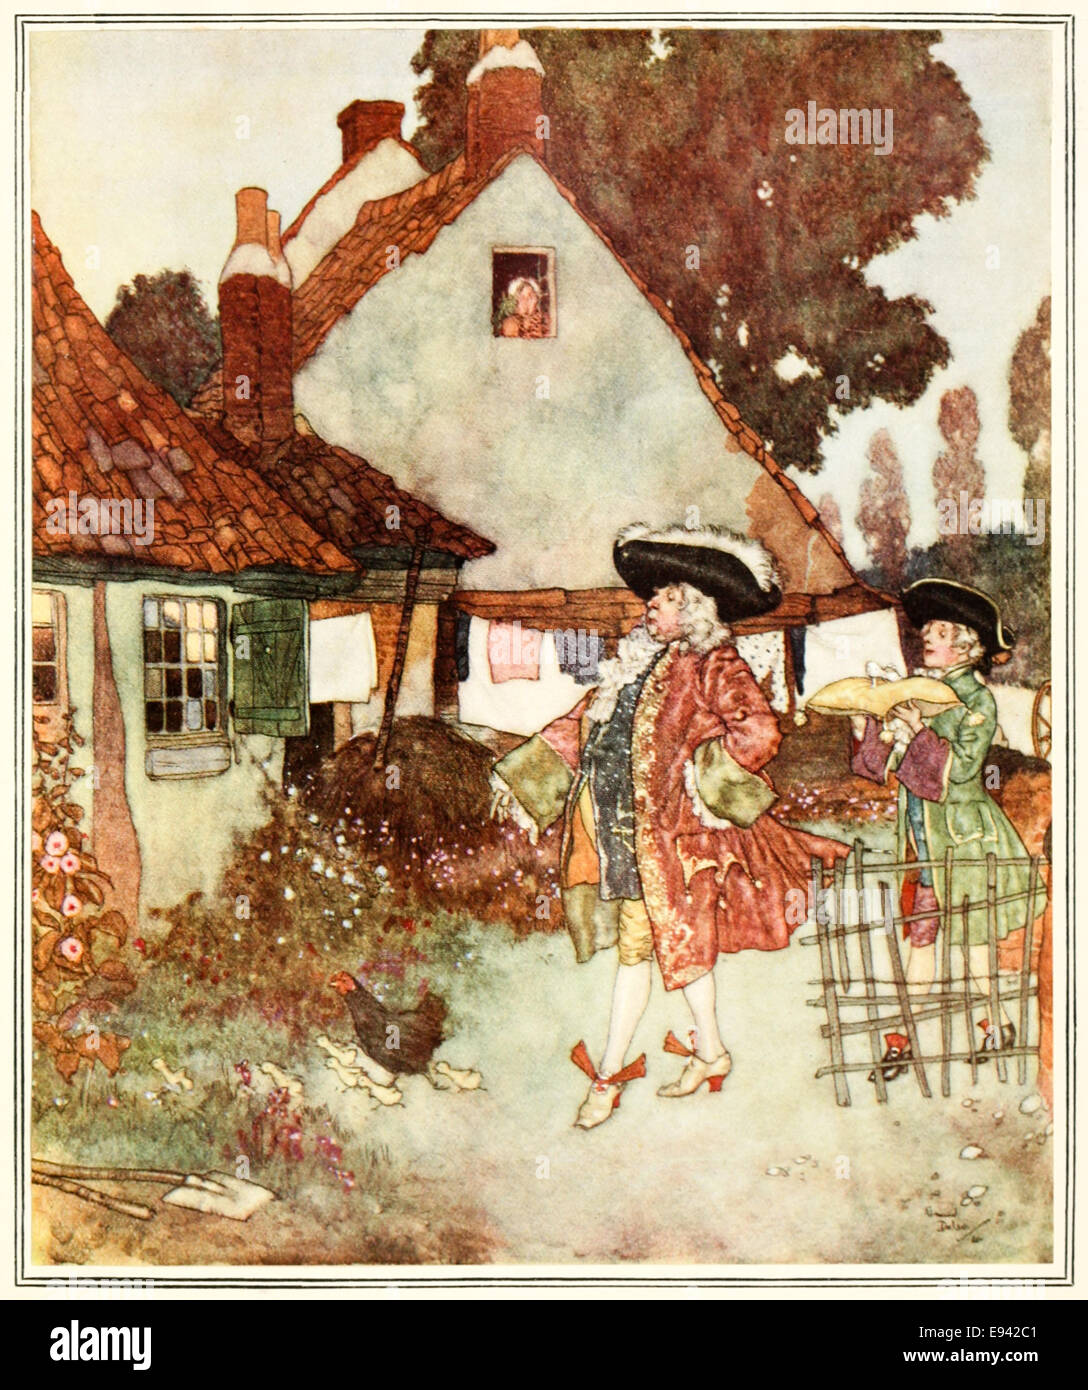 'The Prime Minister searching for the owner of the glass slipper on the orders of the Prince' from the story 'Cinderella' illustrated by Edmund Dulac (1882-1953). See description for more information Stock Photo